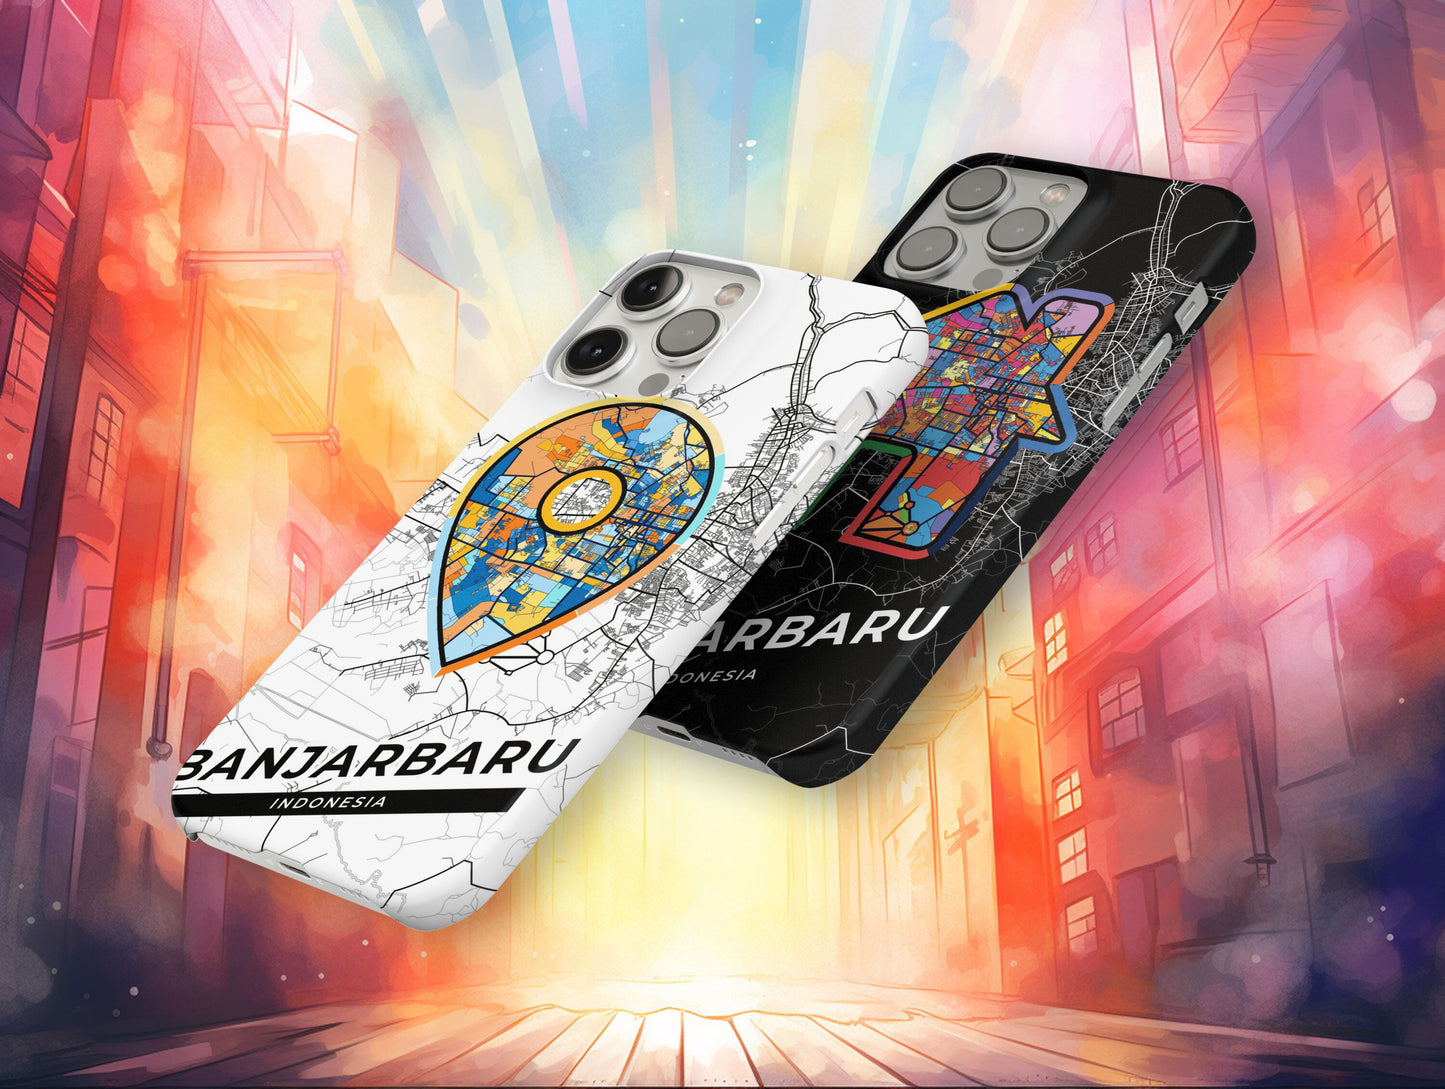 Banjarbaru Indonesia slim phone case with colorful icon. Birthday, wedding or housewarming gift. Couple match cases.